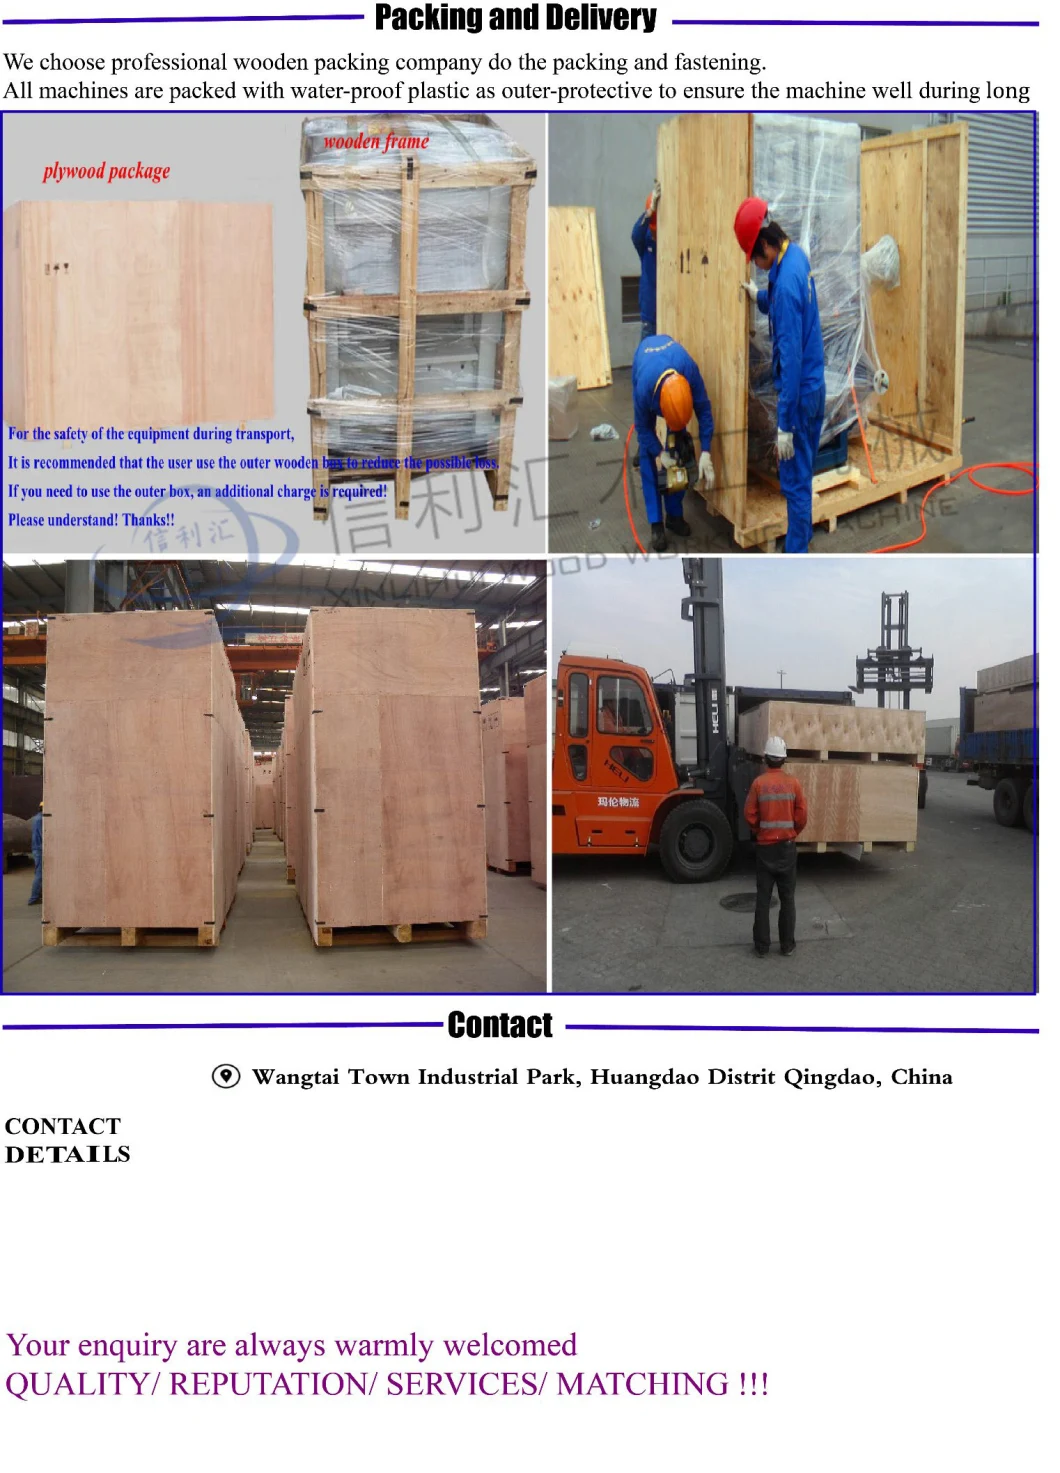 Plywood Edge Cutting Machine Precise Cuts of Chip Boards and MDF and Particle Boards Saw Machine/ Maquina PARA Cortar Madera Slide Cutting Machines